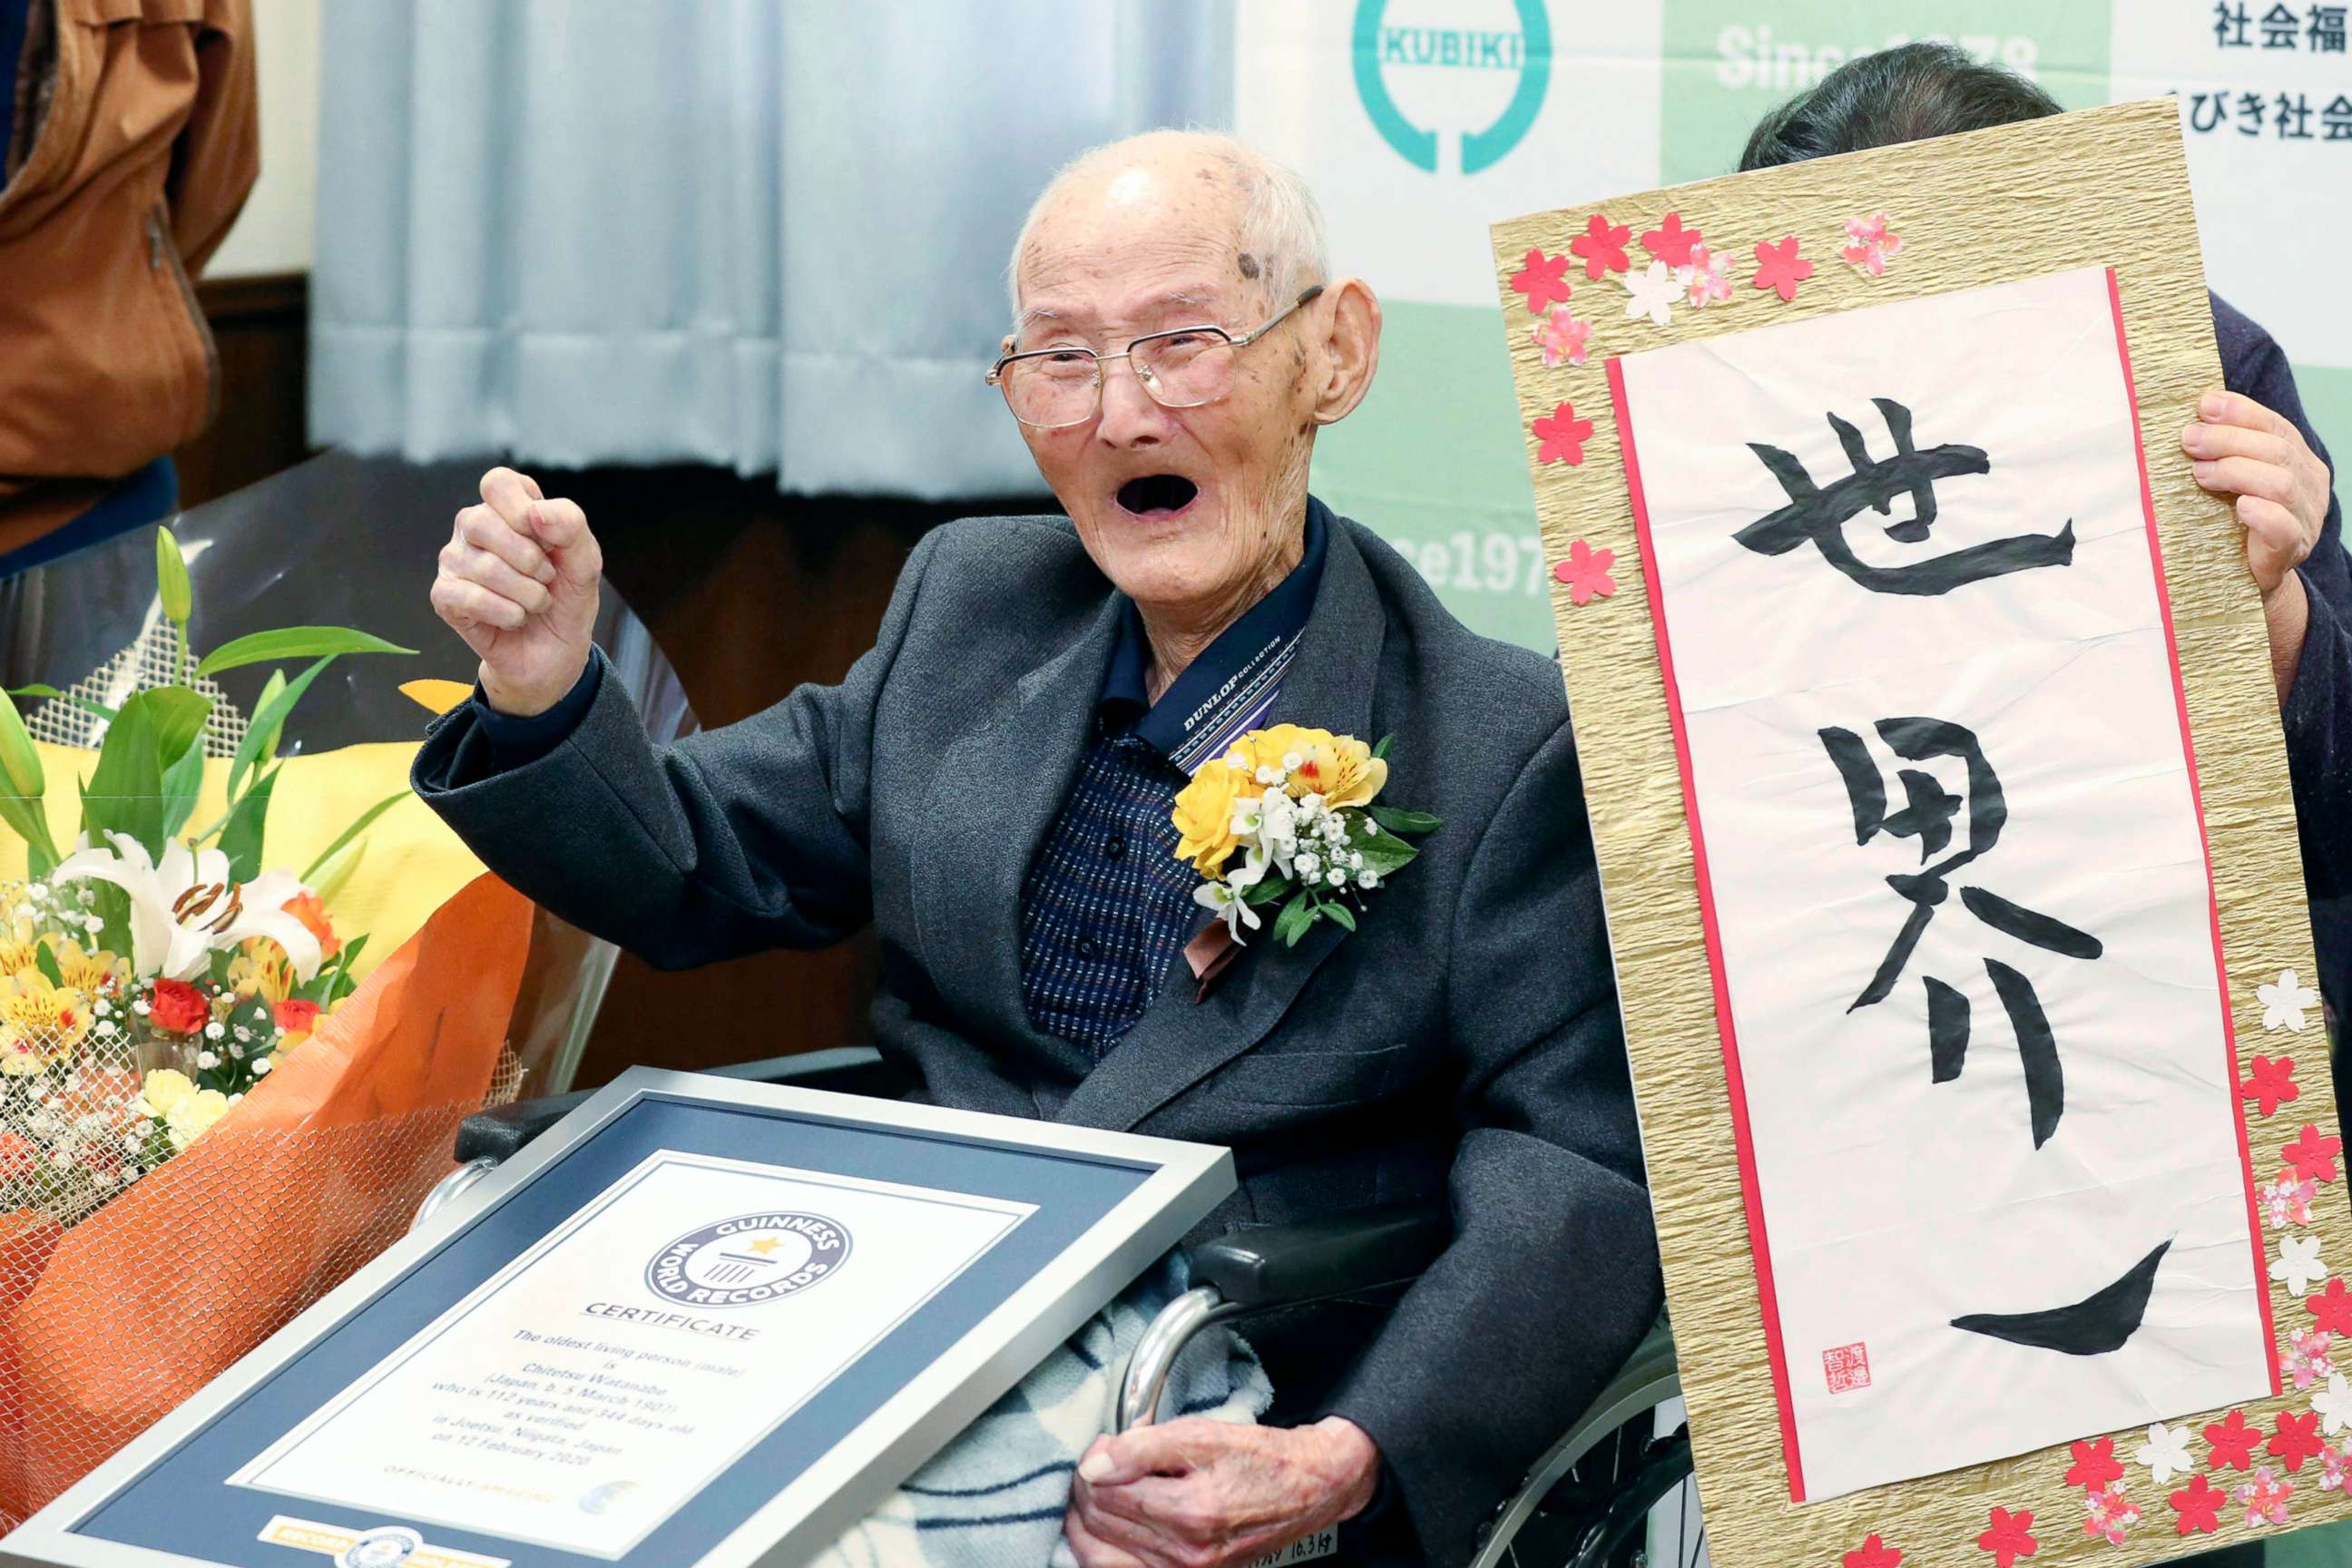 PHOTO: Chitetsu Watanabe, 112, poses next to the calligraphy he wrote after being awarded as the world's oldest living male by Guinness World Records, in Joetsu, Niigata prefecture, northern Japan Feb. 12, 2020.